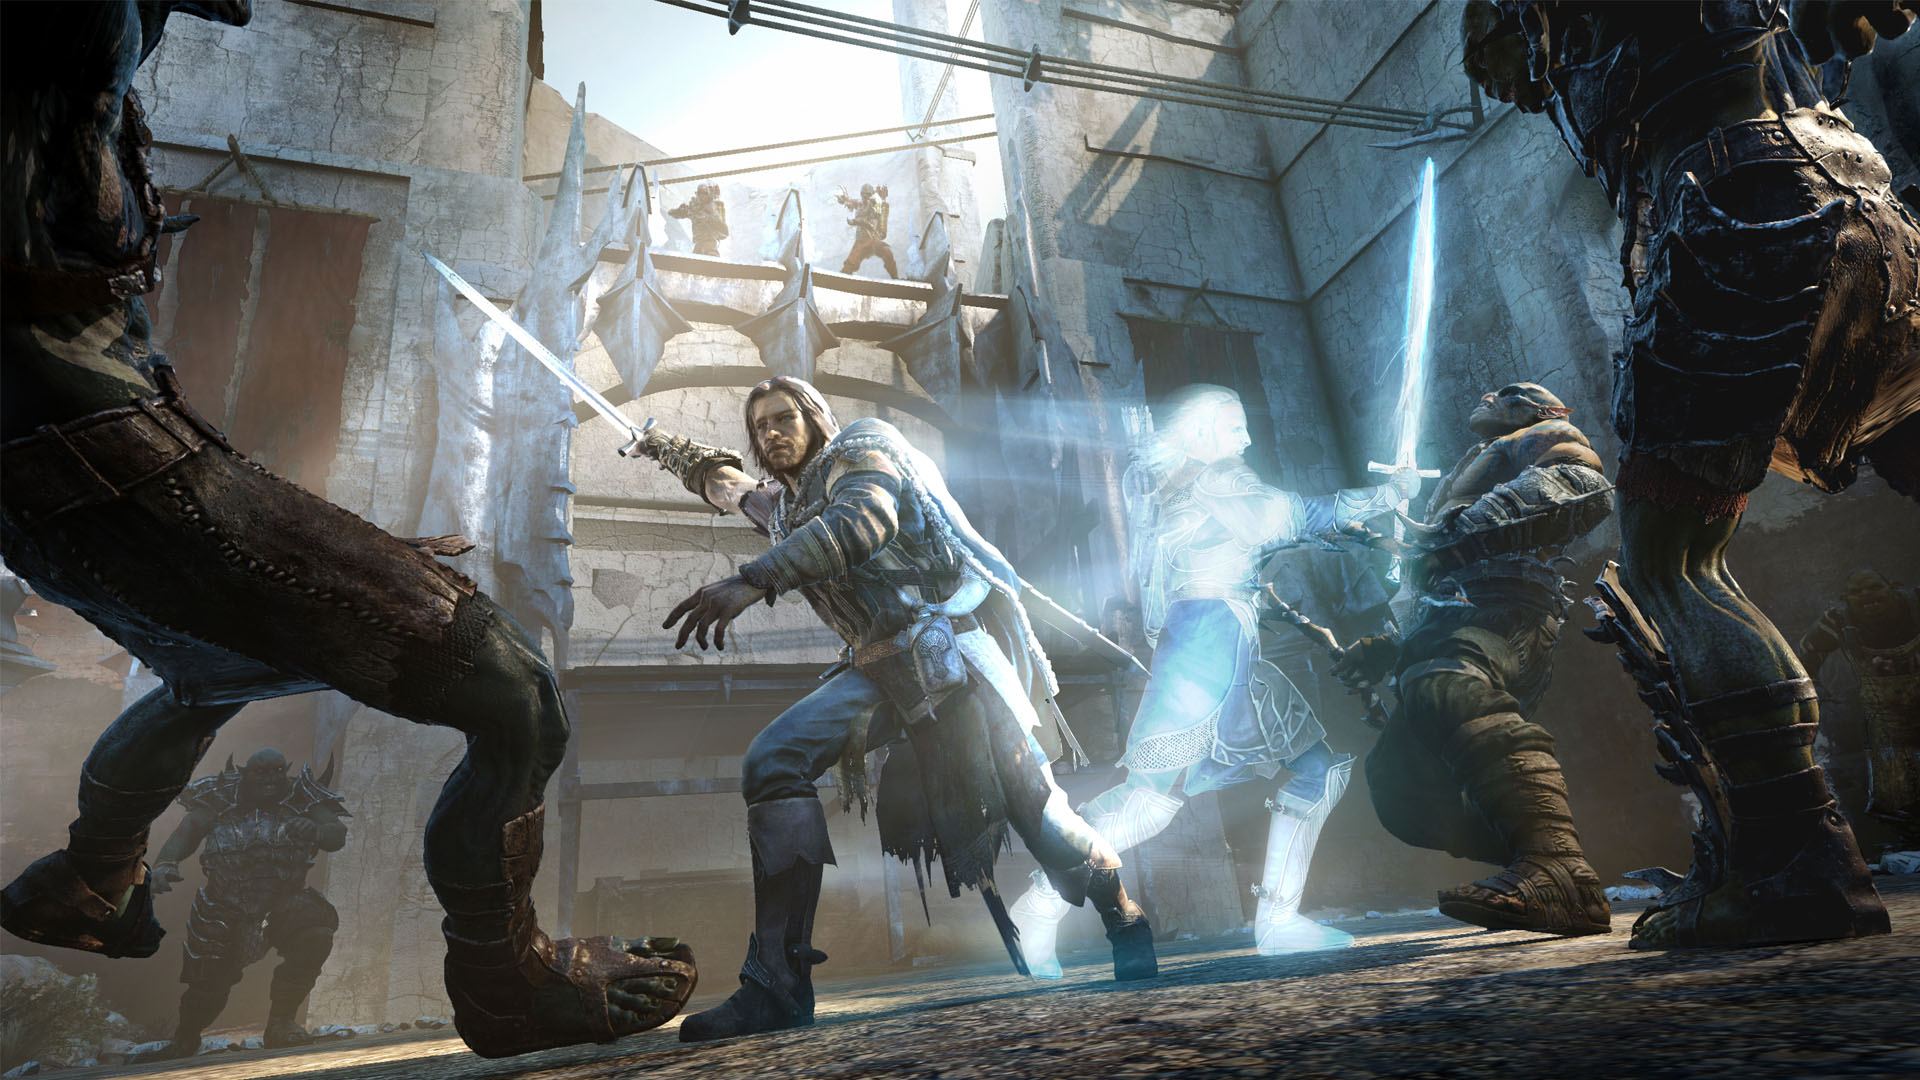 Middle-earth Shadow of Mordor - GOTY Edition Upgrade - PC - Compre na Nuuvem